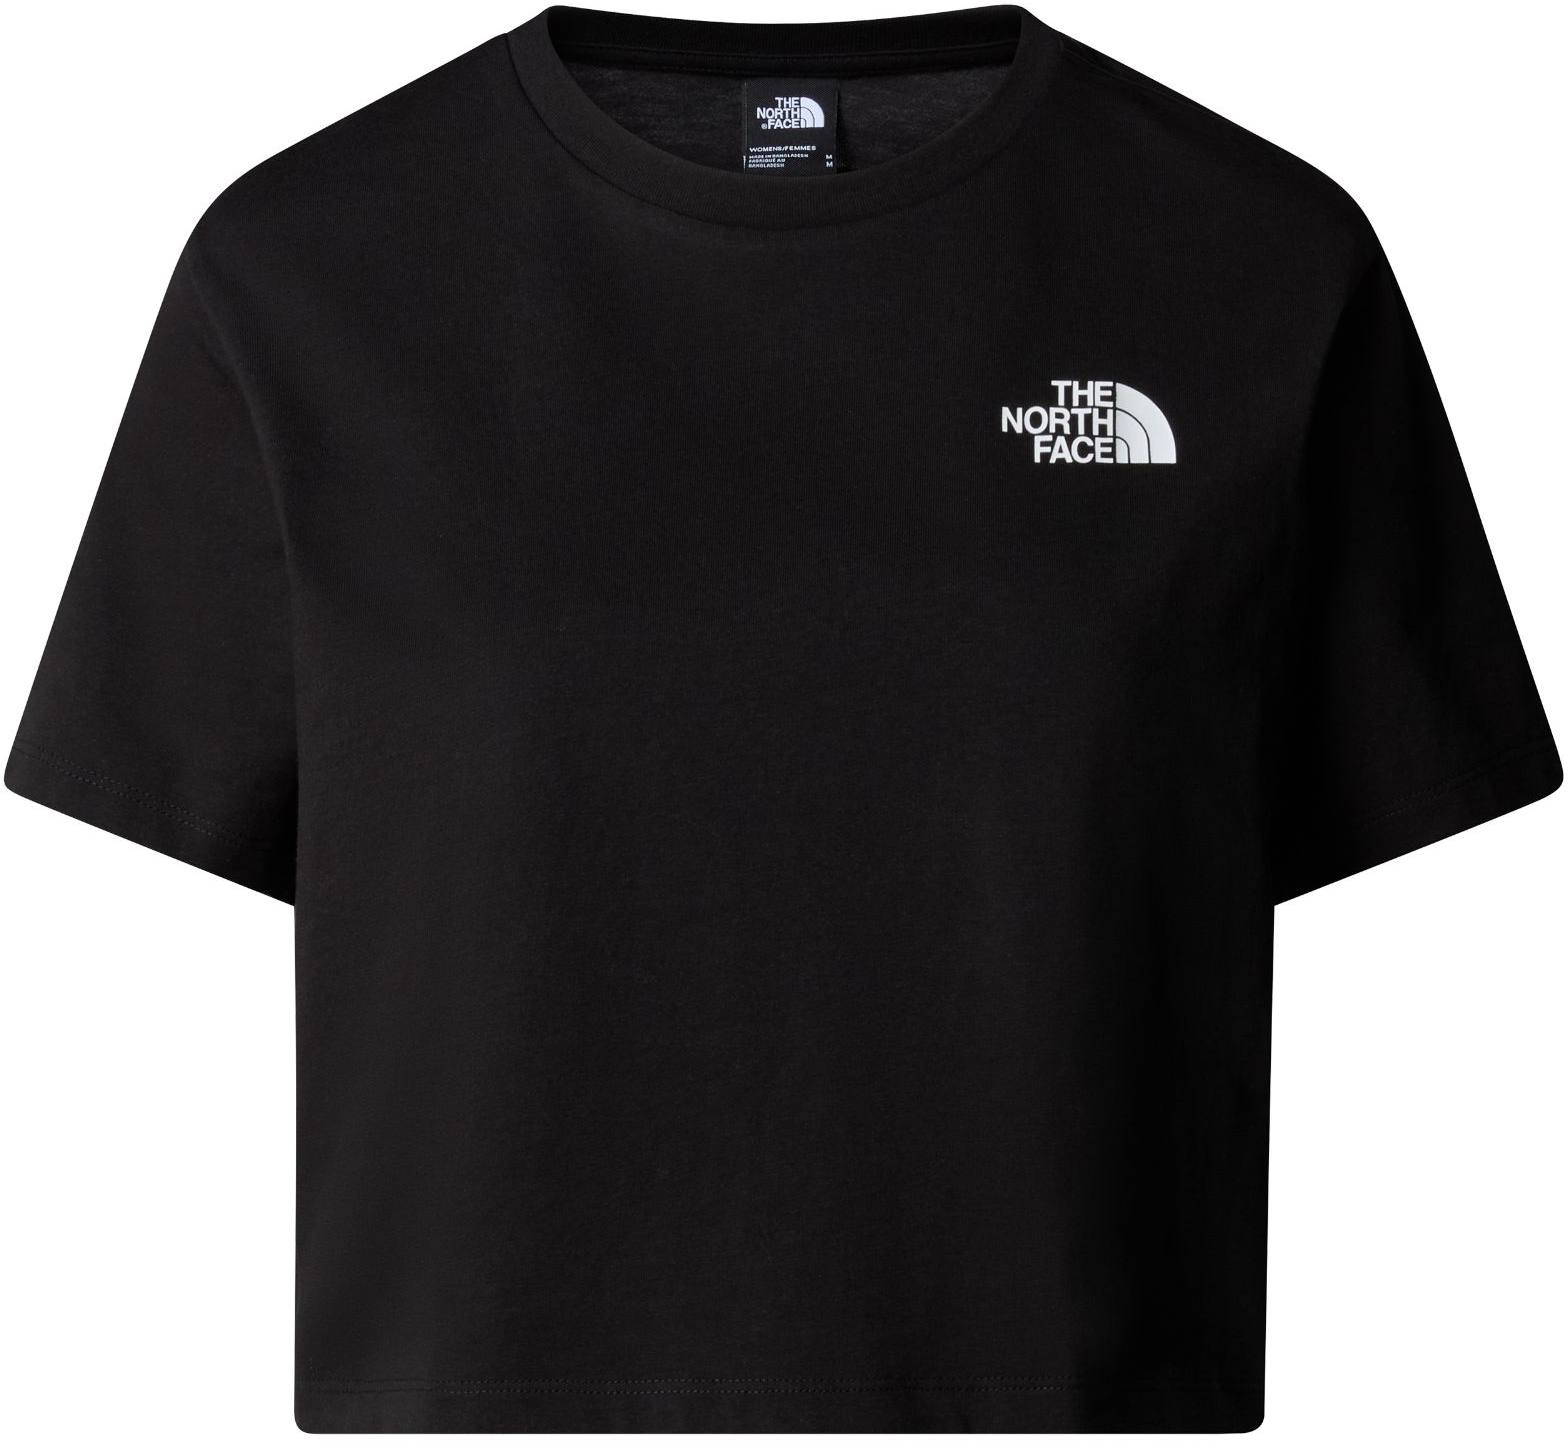 The North Face Women’s Cropped Simple Dome Tee